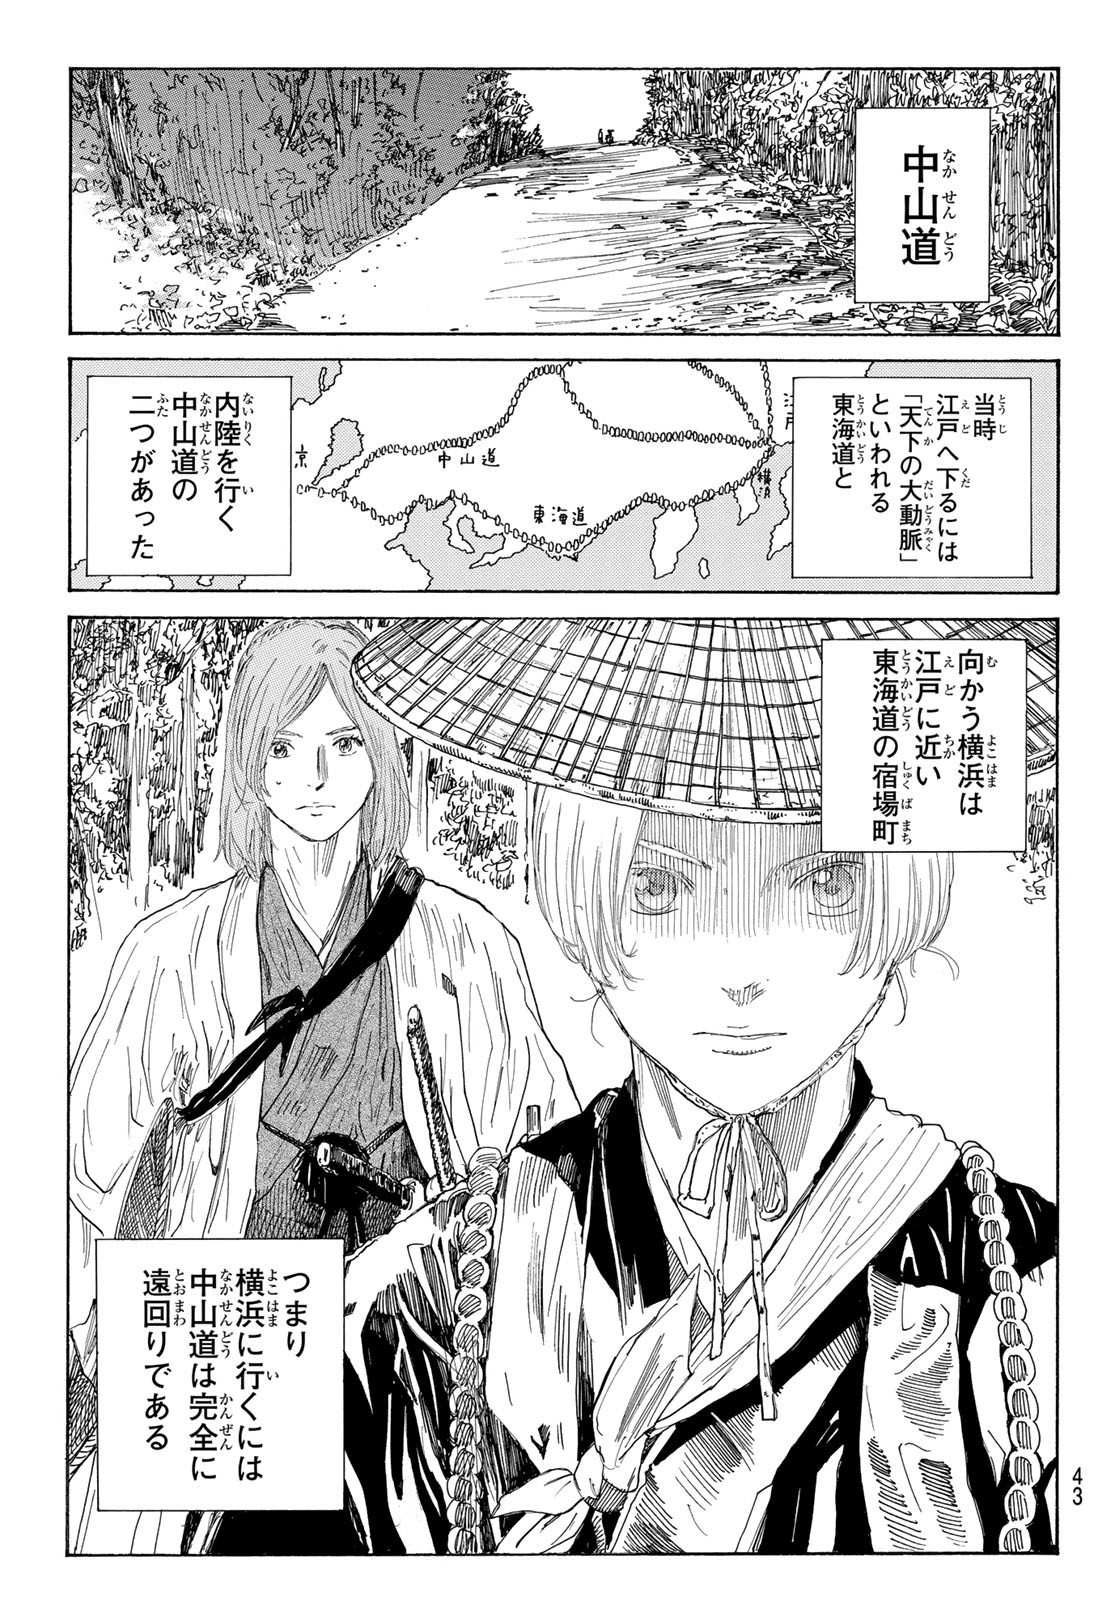 Weekly Shōnen Magazine - 週刊少年マガジン - Chapter 2024-23 - Page 41